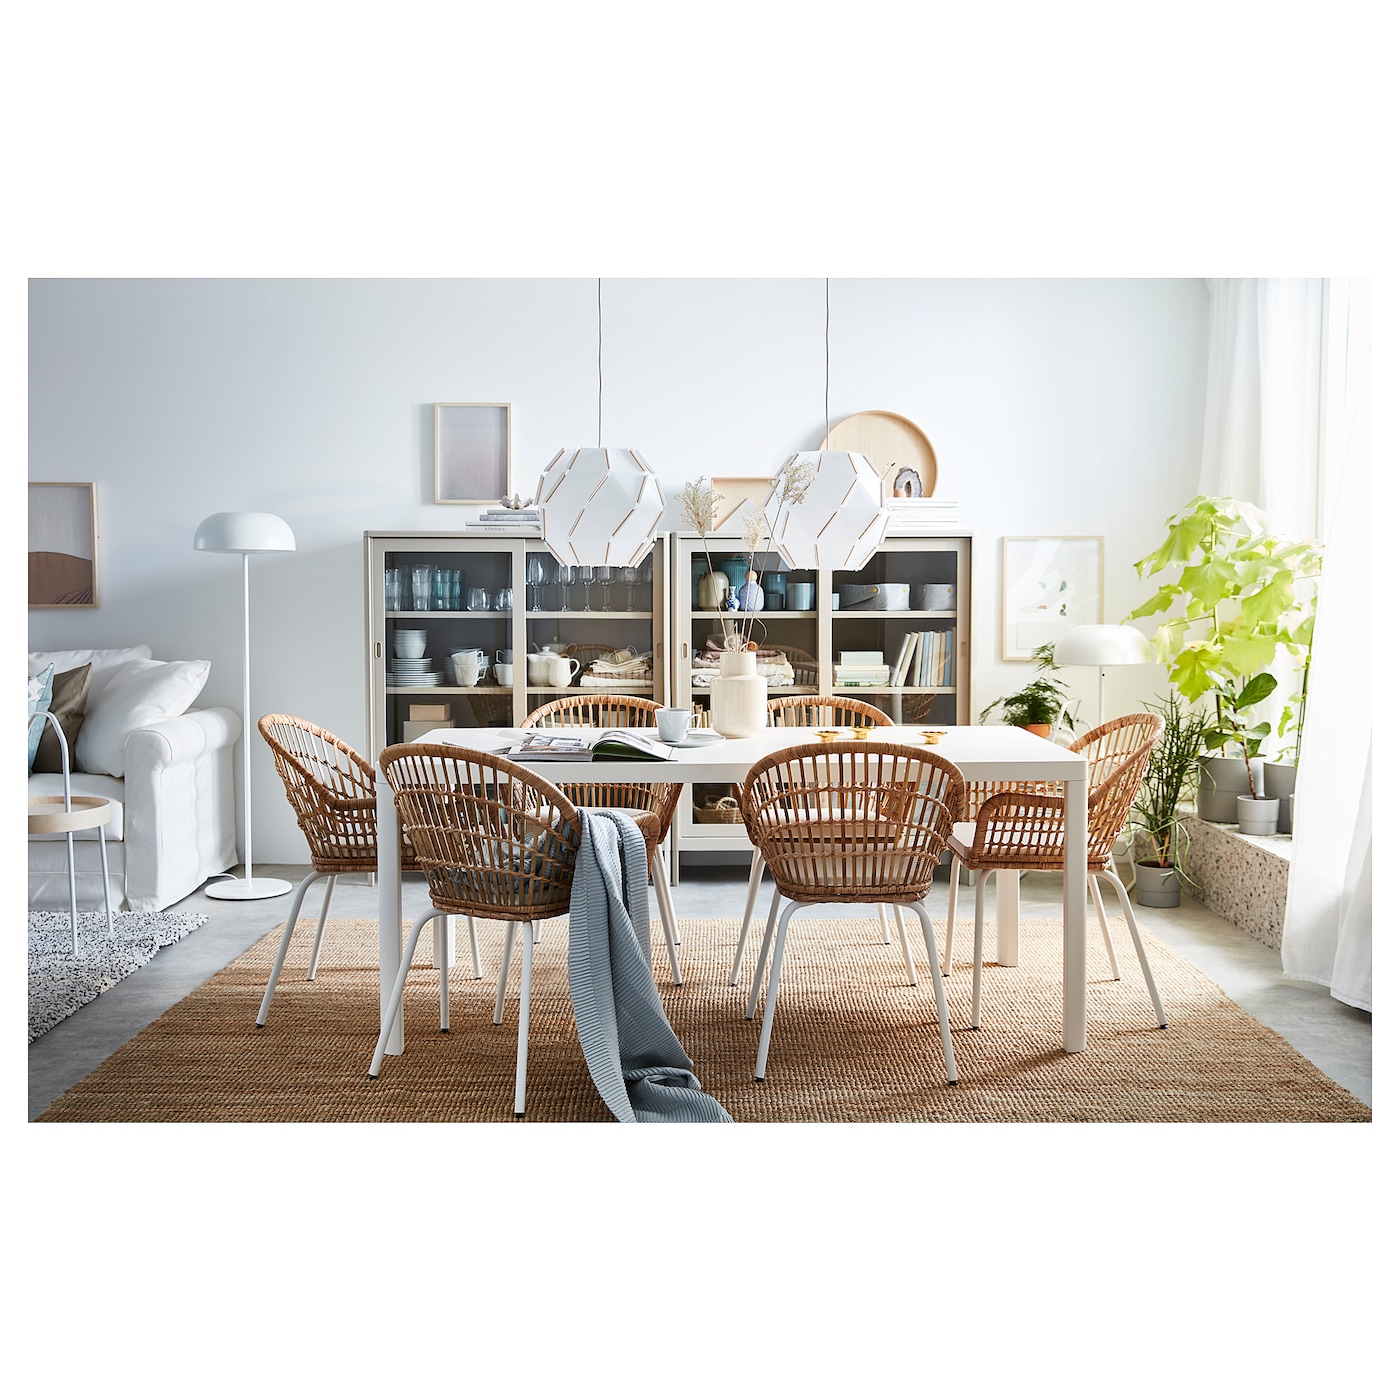 NILSOVE chair with armrests rattan/white - IKEA